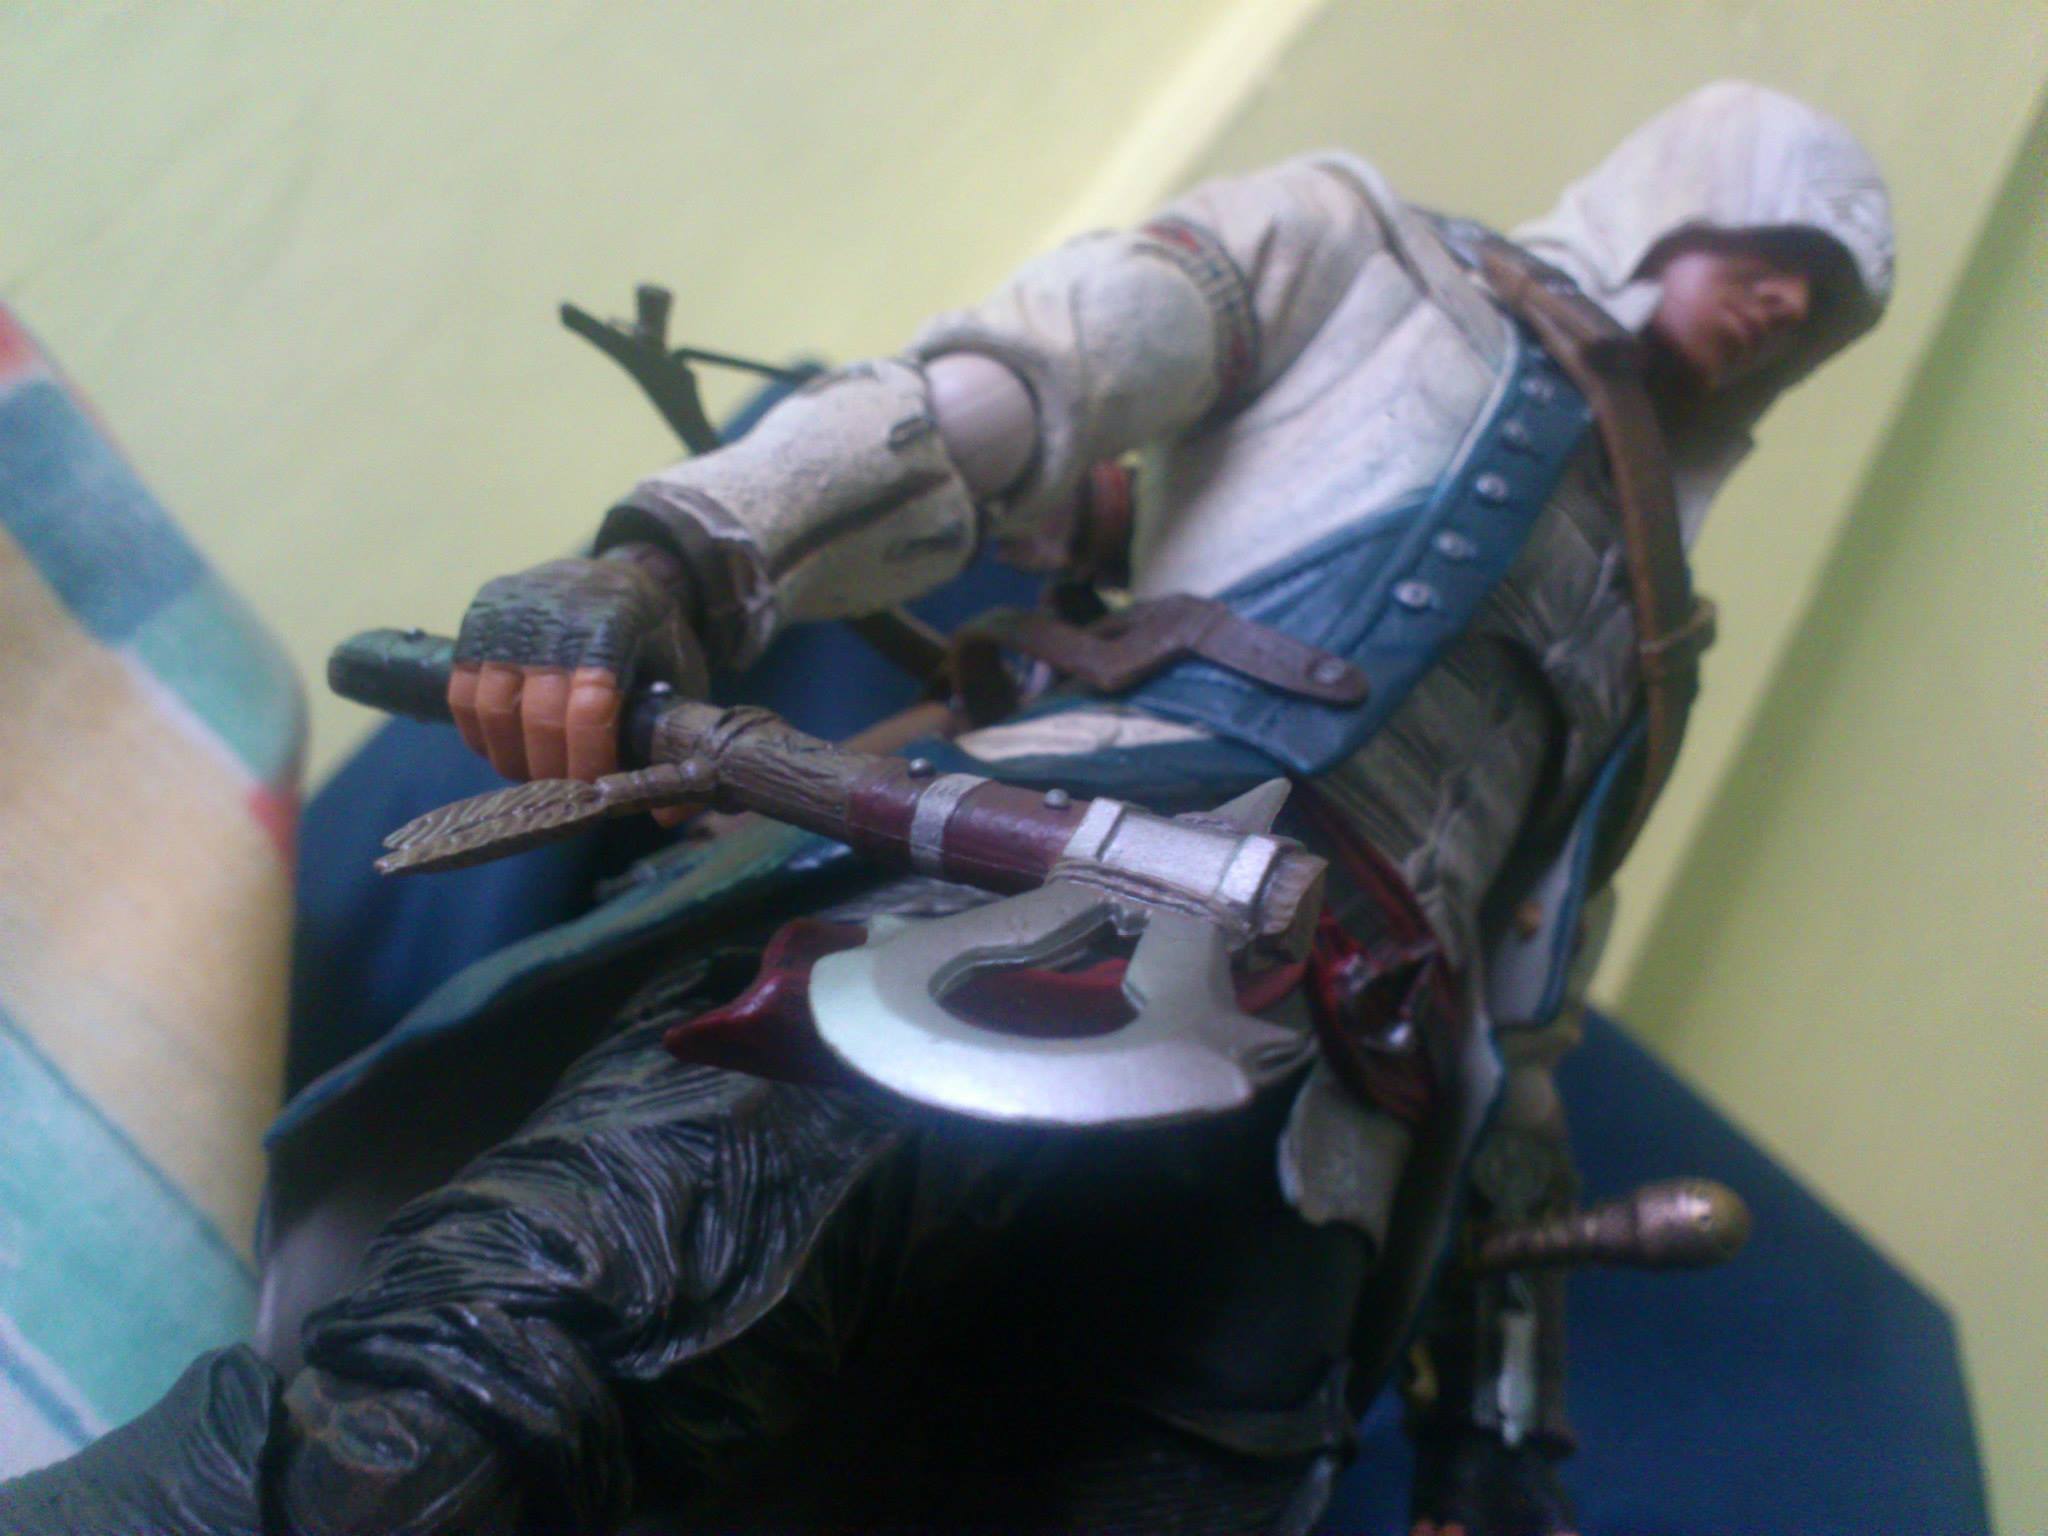 Assassin's Creed 3 Connor Kenway Play Arts Kai Action Figure